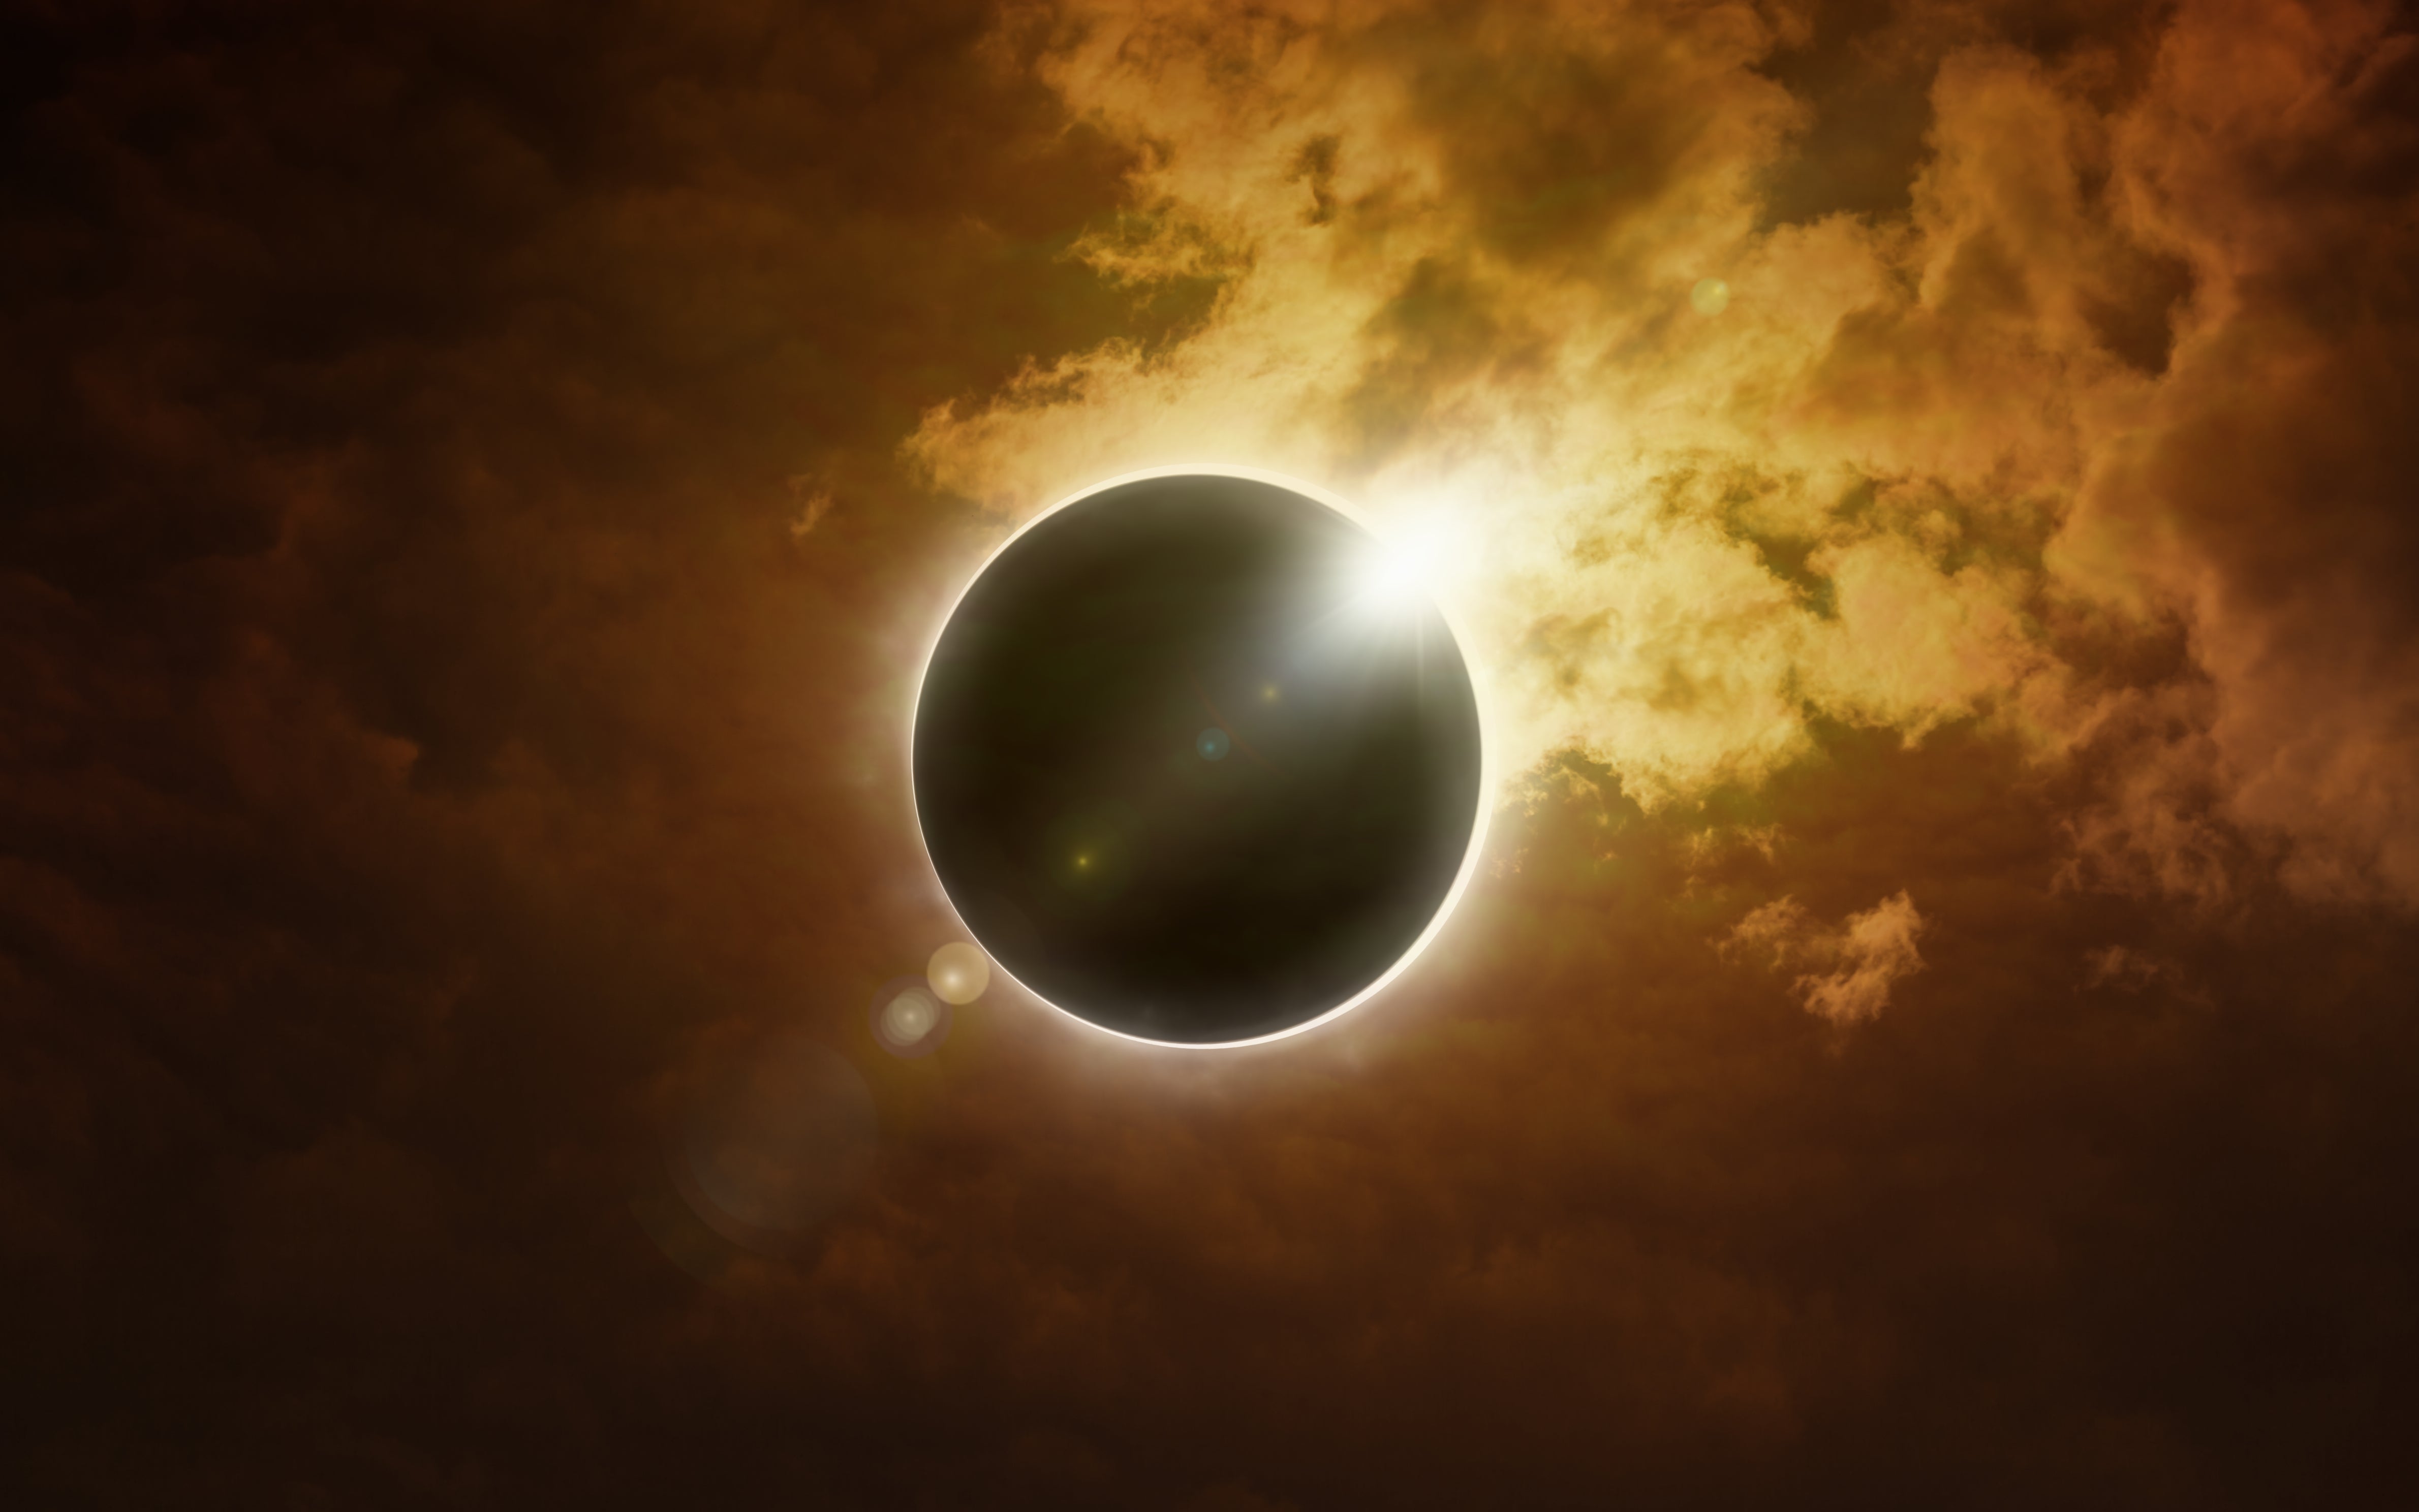 How To Watch Today’s Annular Solar Eclipse